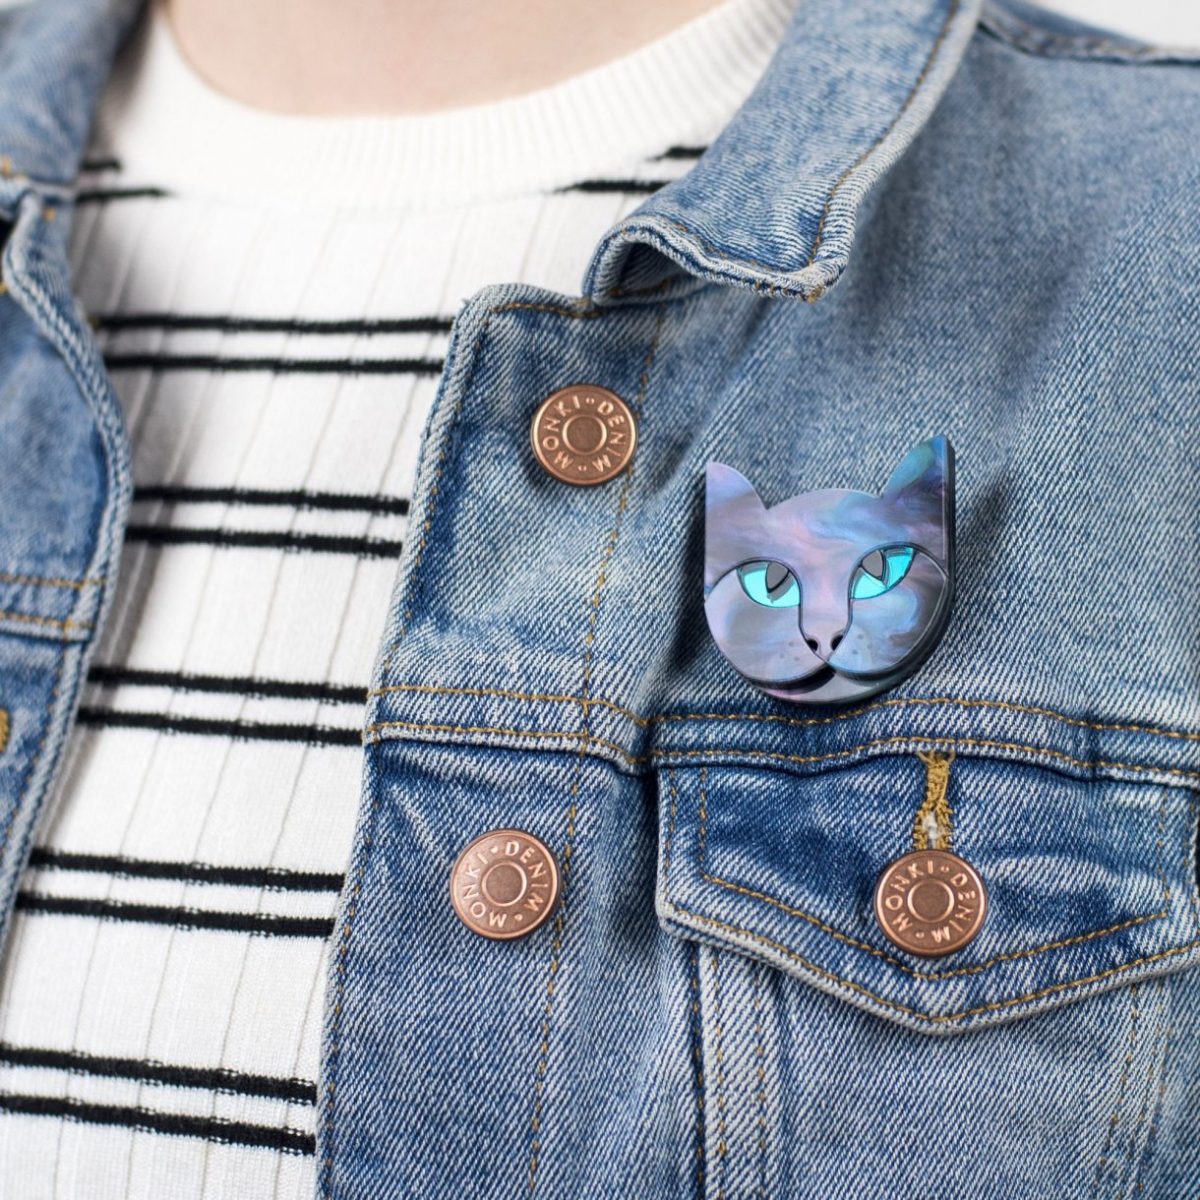 Acrylic Cat Brooch, Grey Cat Gift, Cat Brooches For Women, Animal Jewellery, Pet Brooch Pin, Laser Cut Acrylic, Feline Badge, Brooch For Her